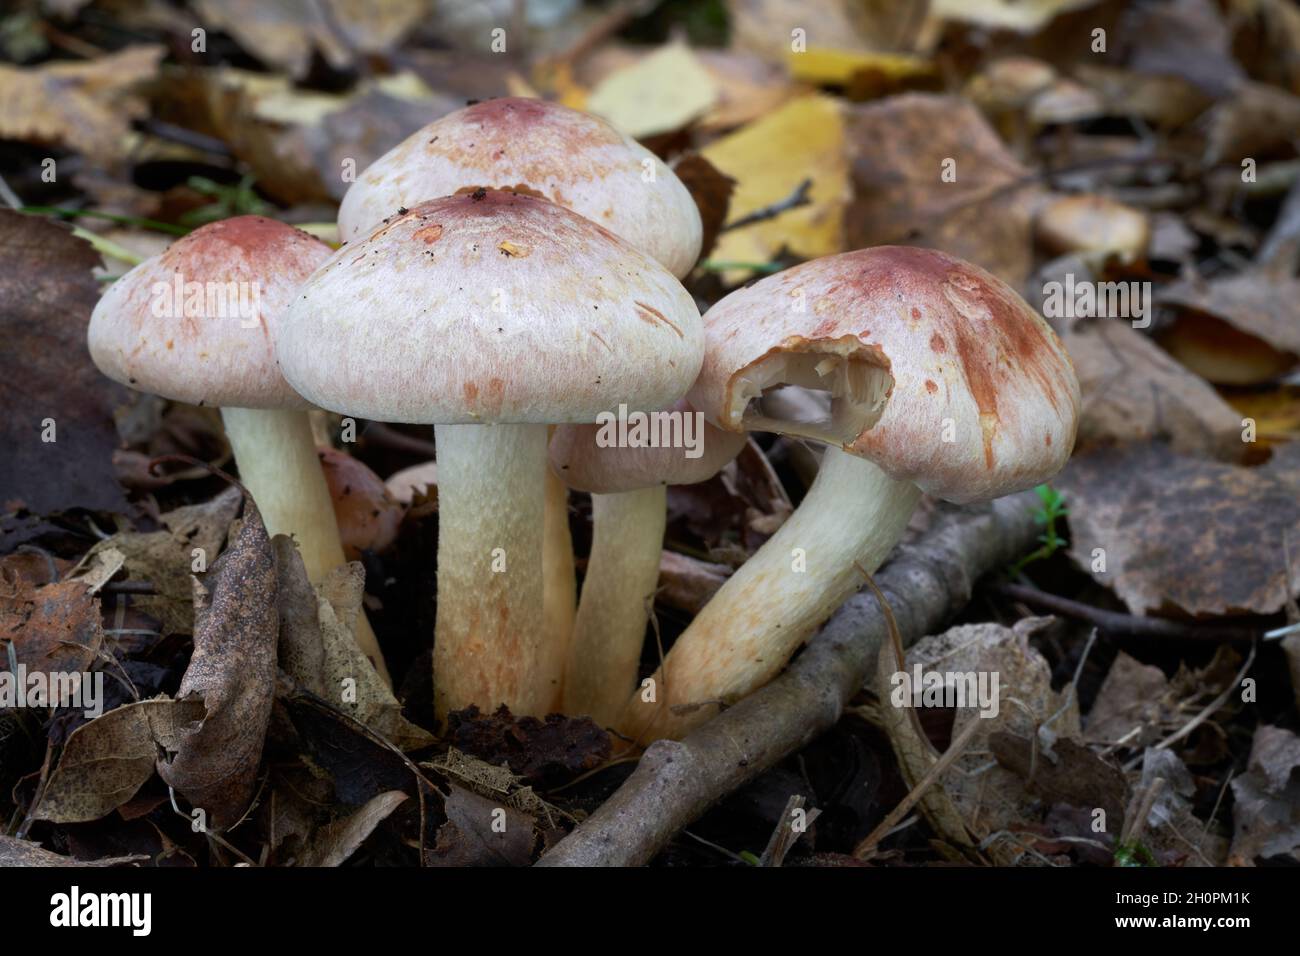 Inedible mushroom Hypholoma lateritium in birch forest. Known as Brick Cap or Brick Top. Bunch of wild mushrooms growing in the leaves. Stock Photo